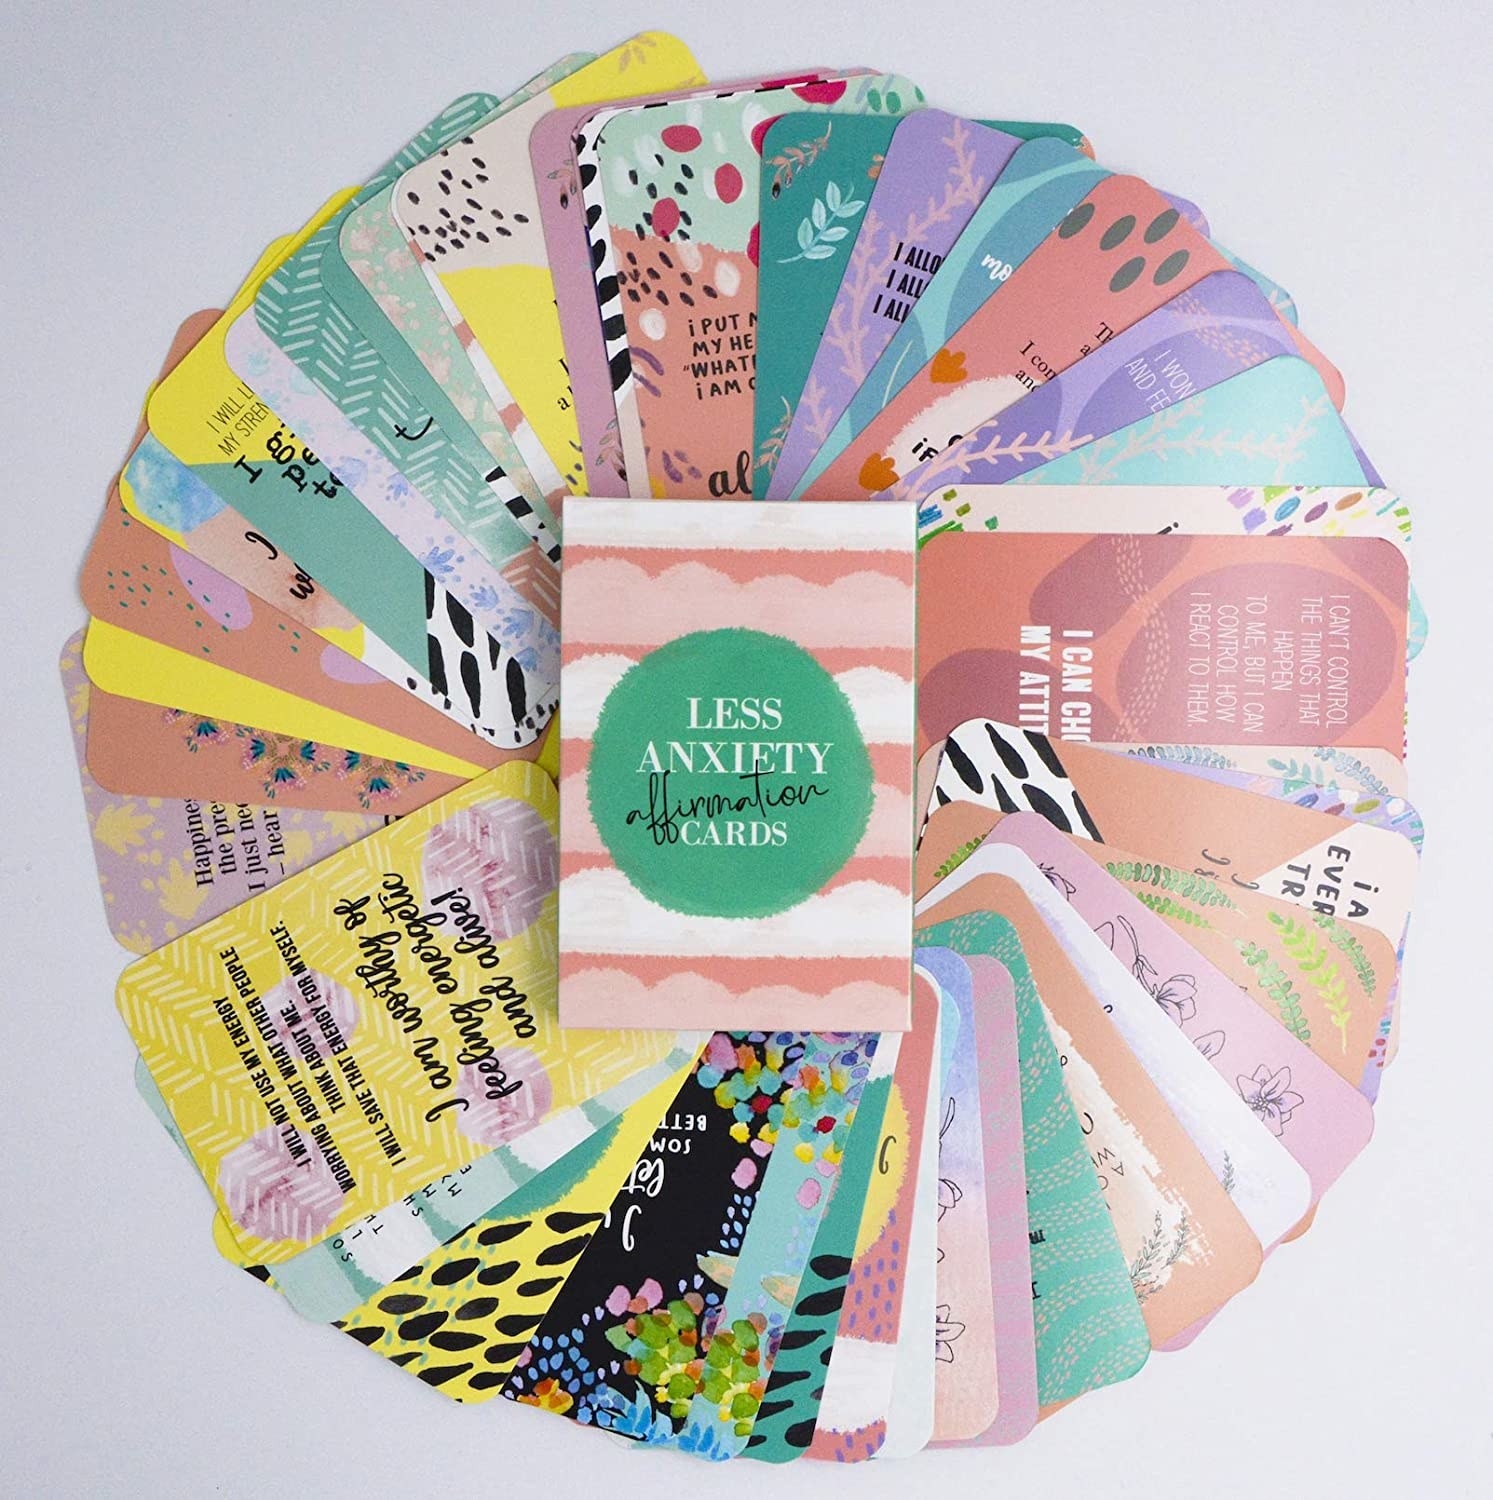 The affirmation cards laid out in a circle